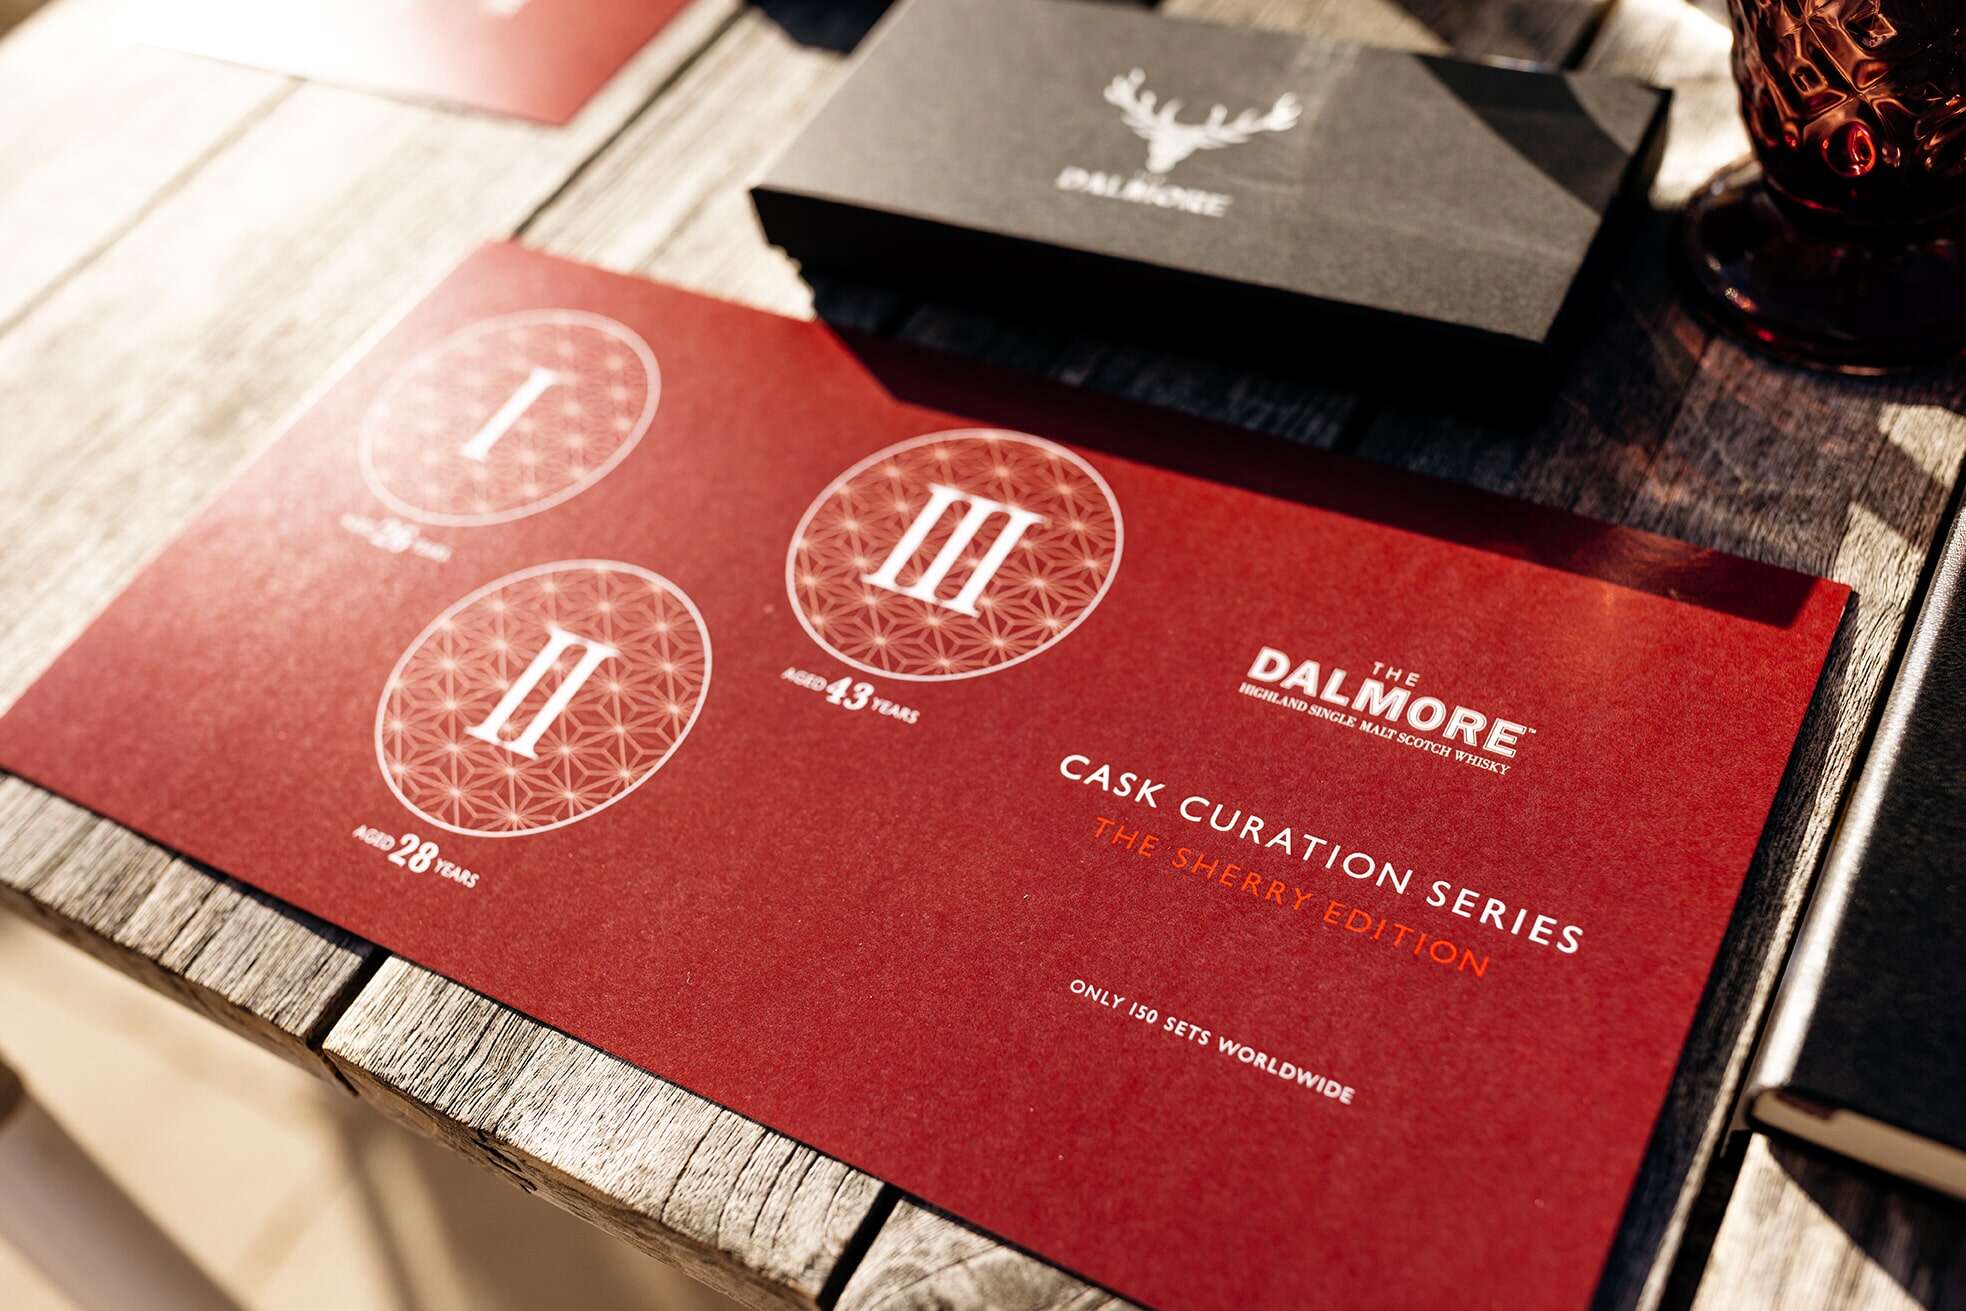 Dalmore cask curation series information